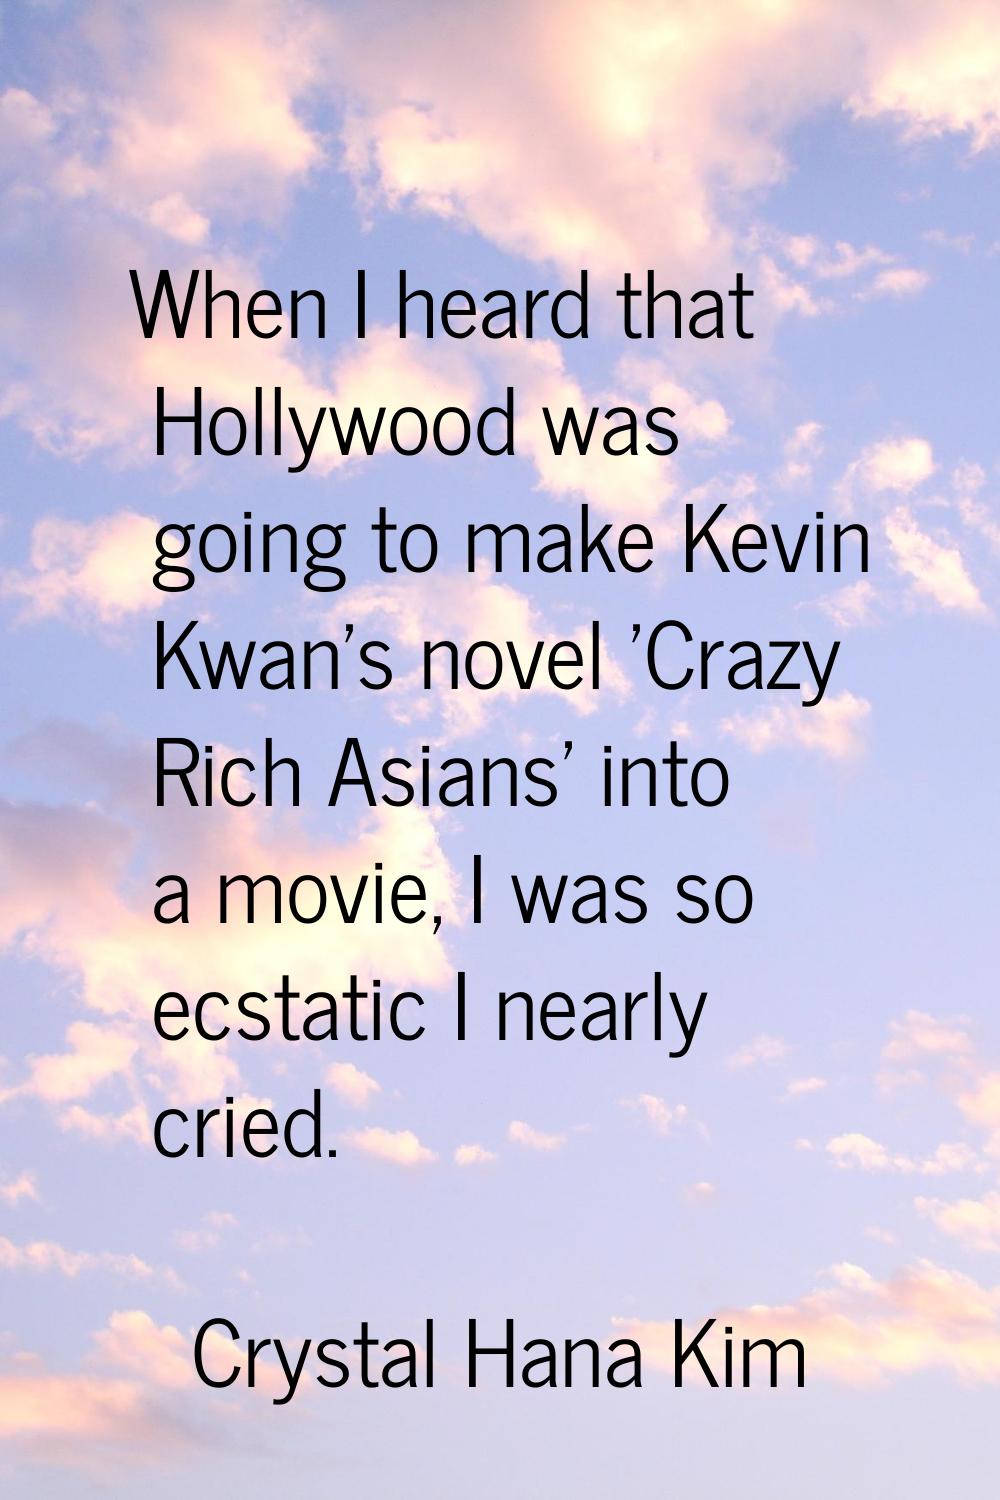 When I heard that Hollywood was going to make Kevin Kwan's novel 'Crazy Rich Asians' into a movie, 